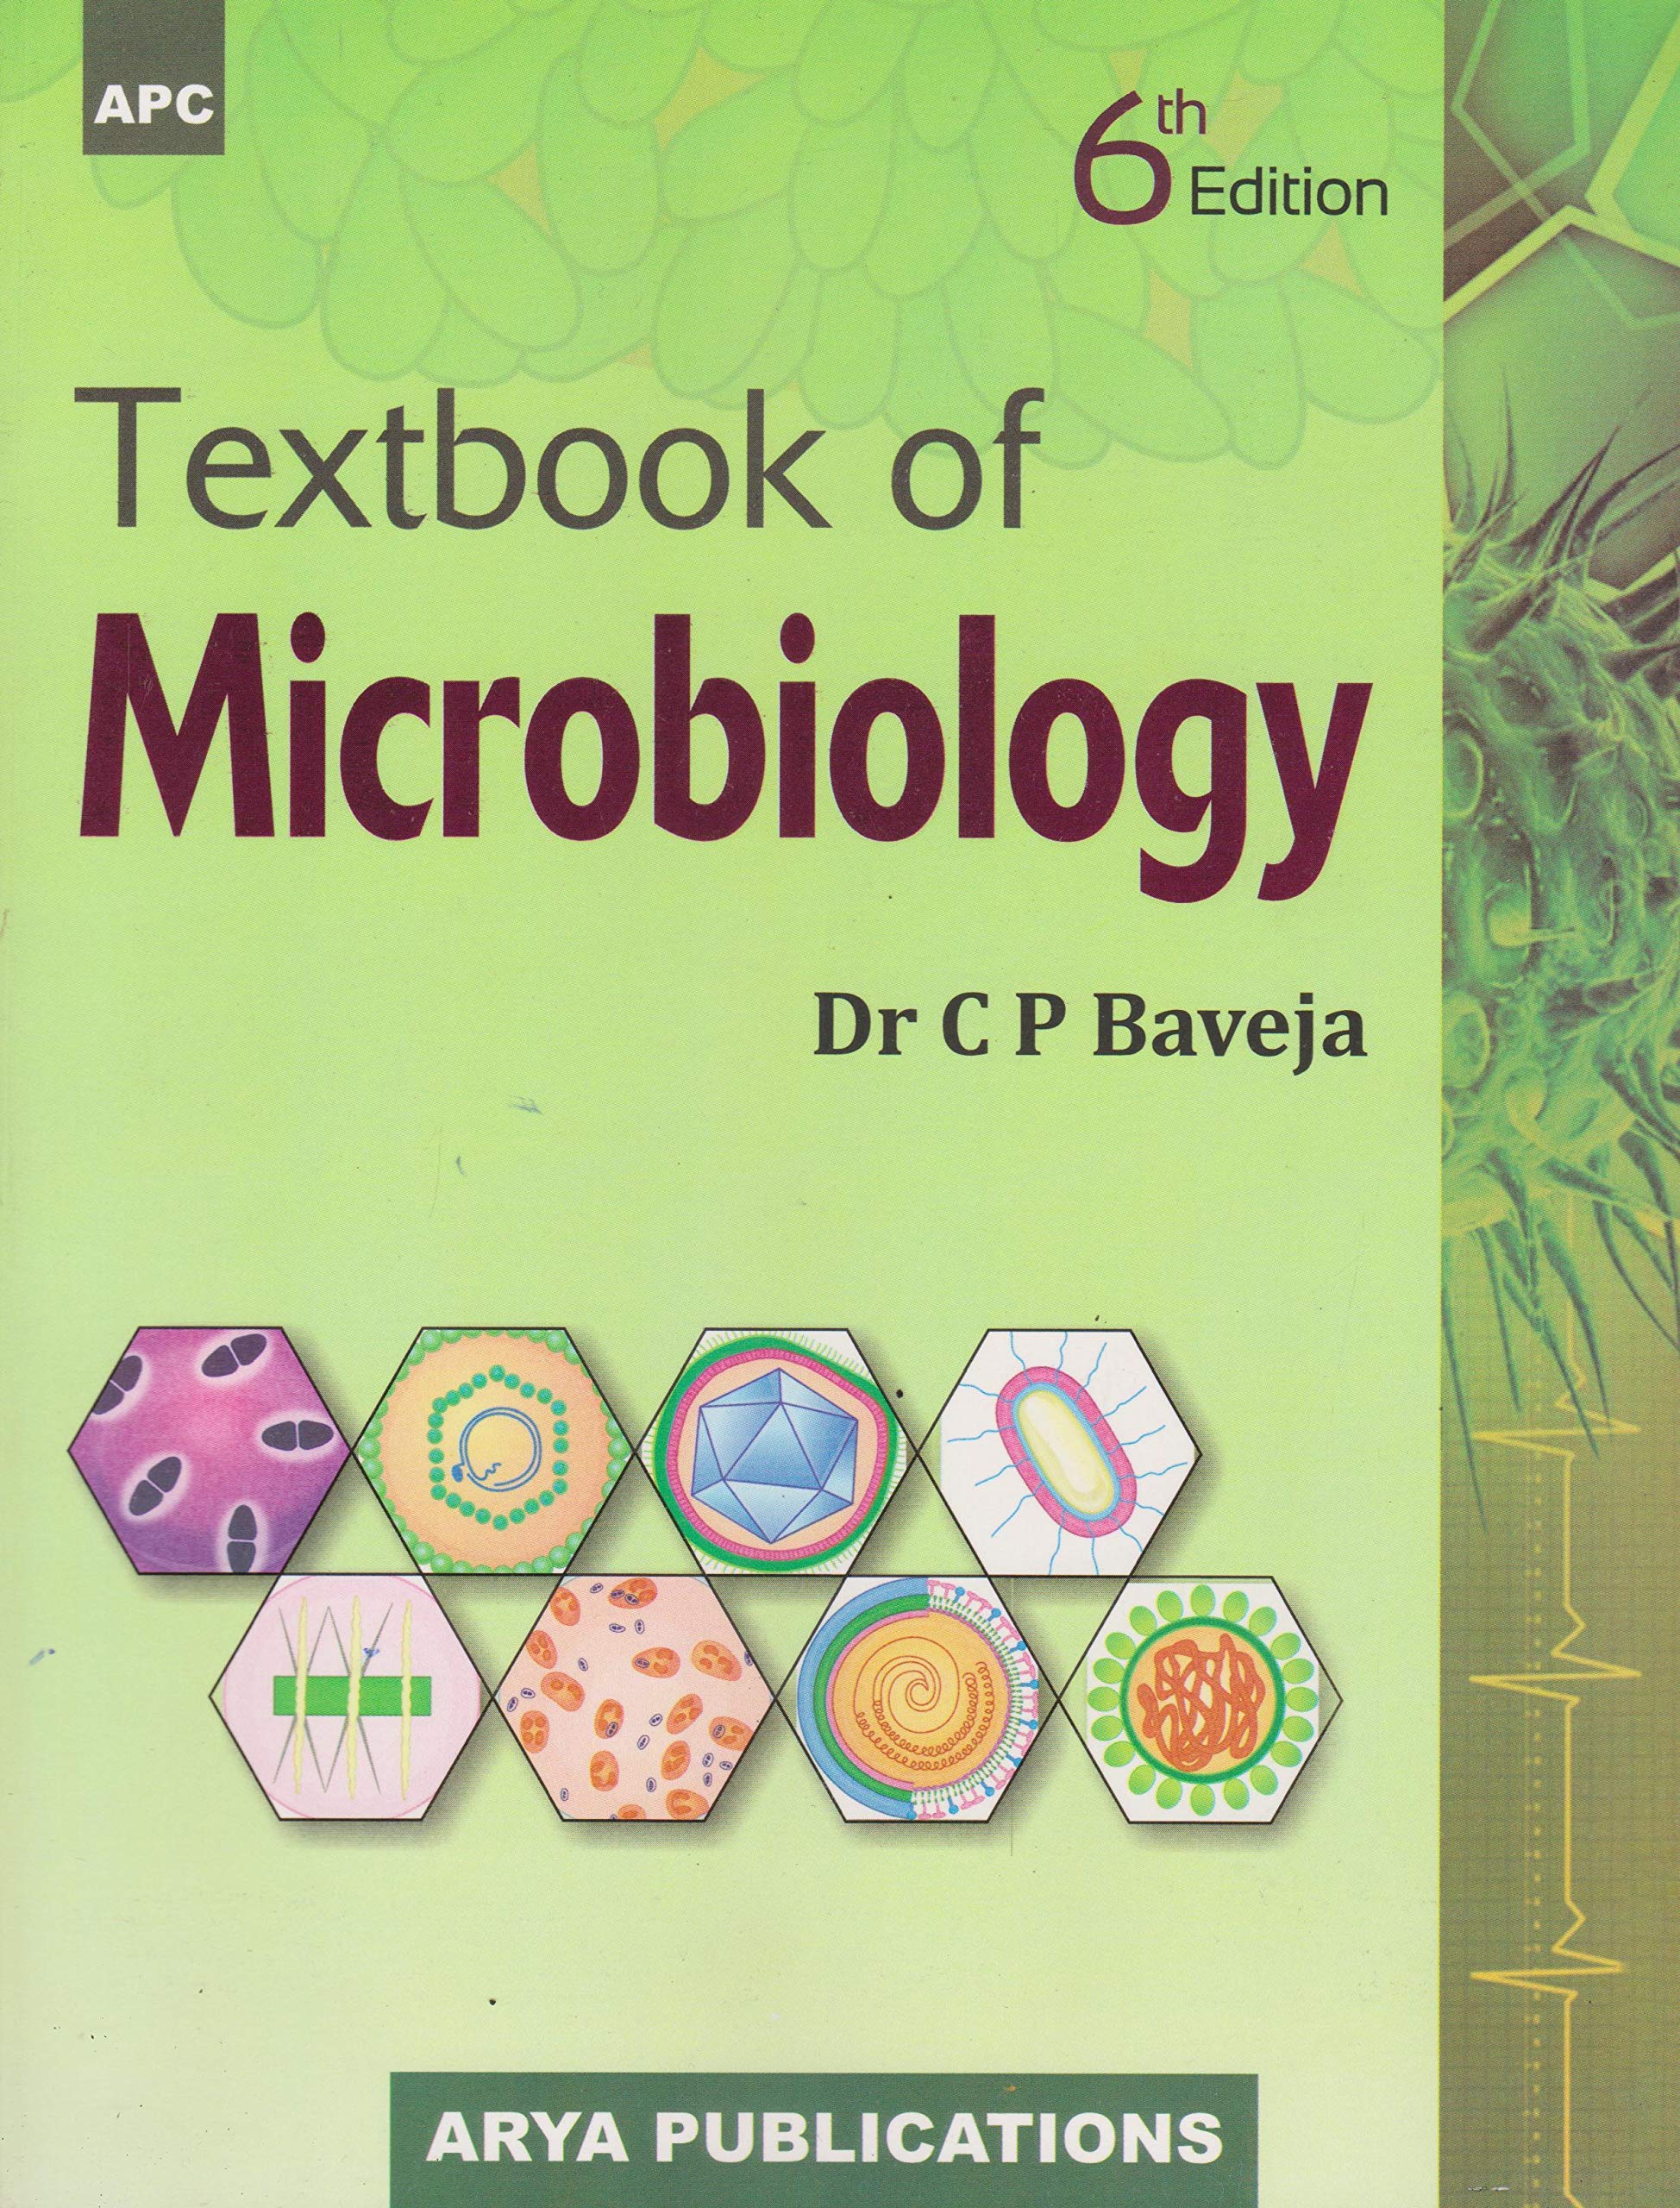 Textbook Of Microbiology MBBS by Dr. CP Baveja